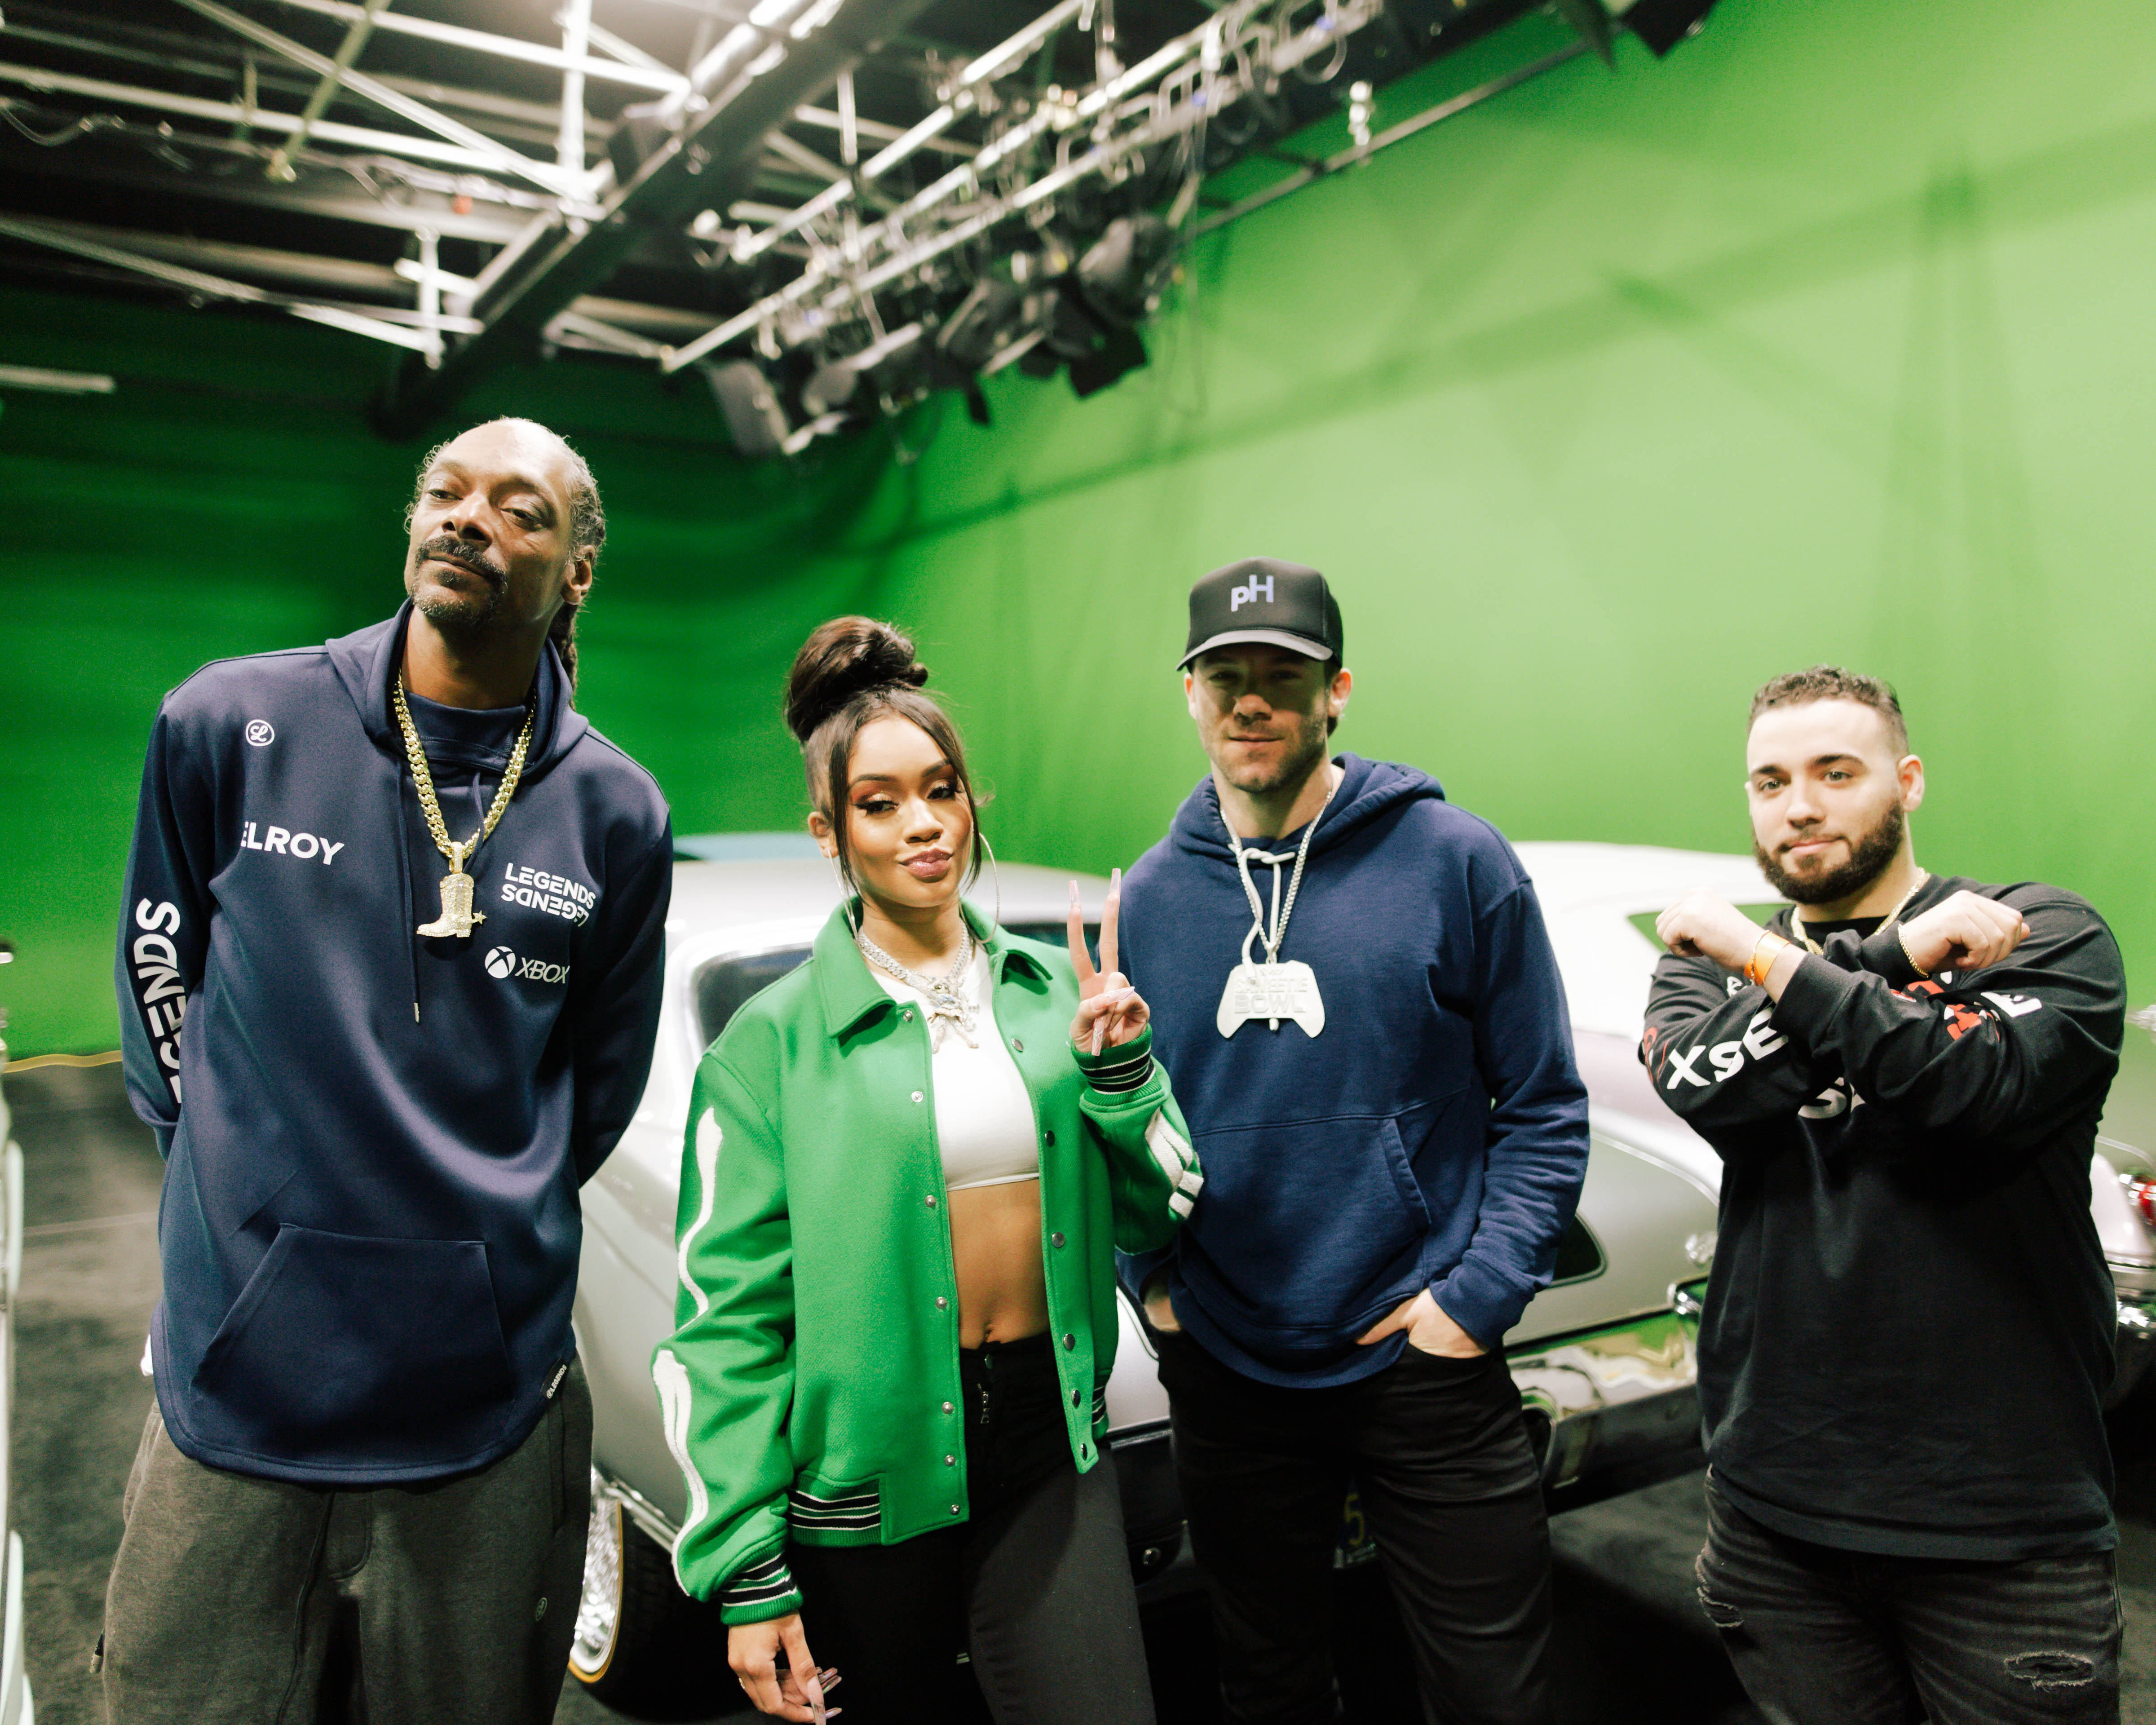 Saweetie & Xbox Team Up For Inaugural Saweetie Bowl Gaming Competition